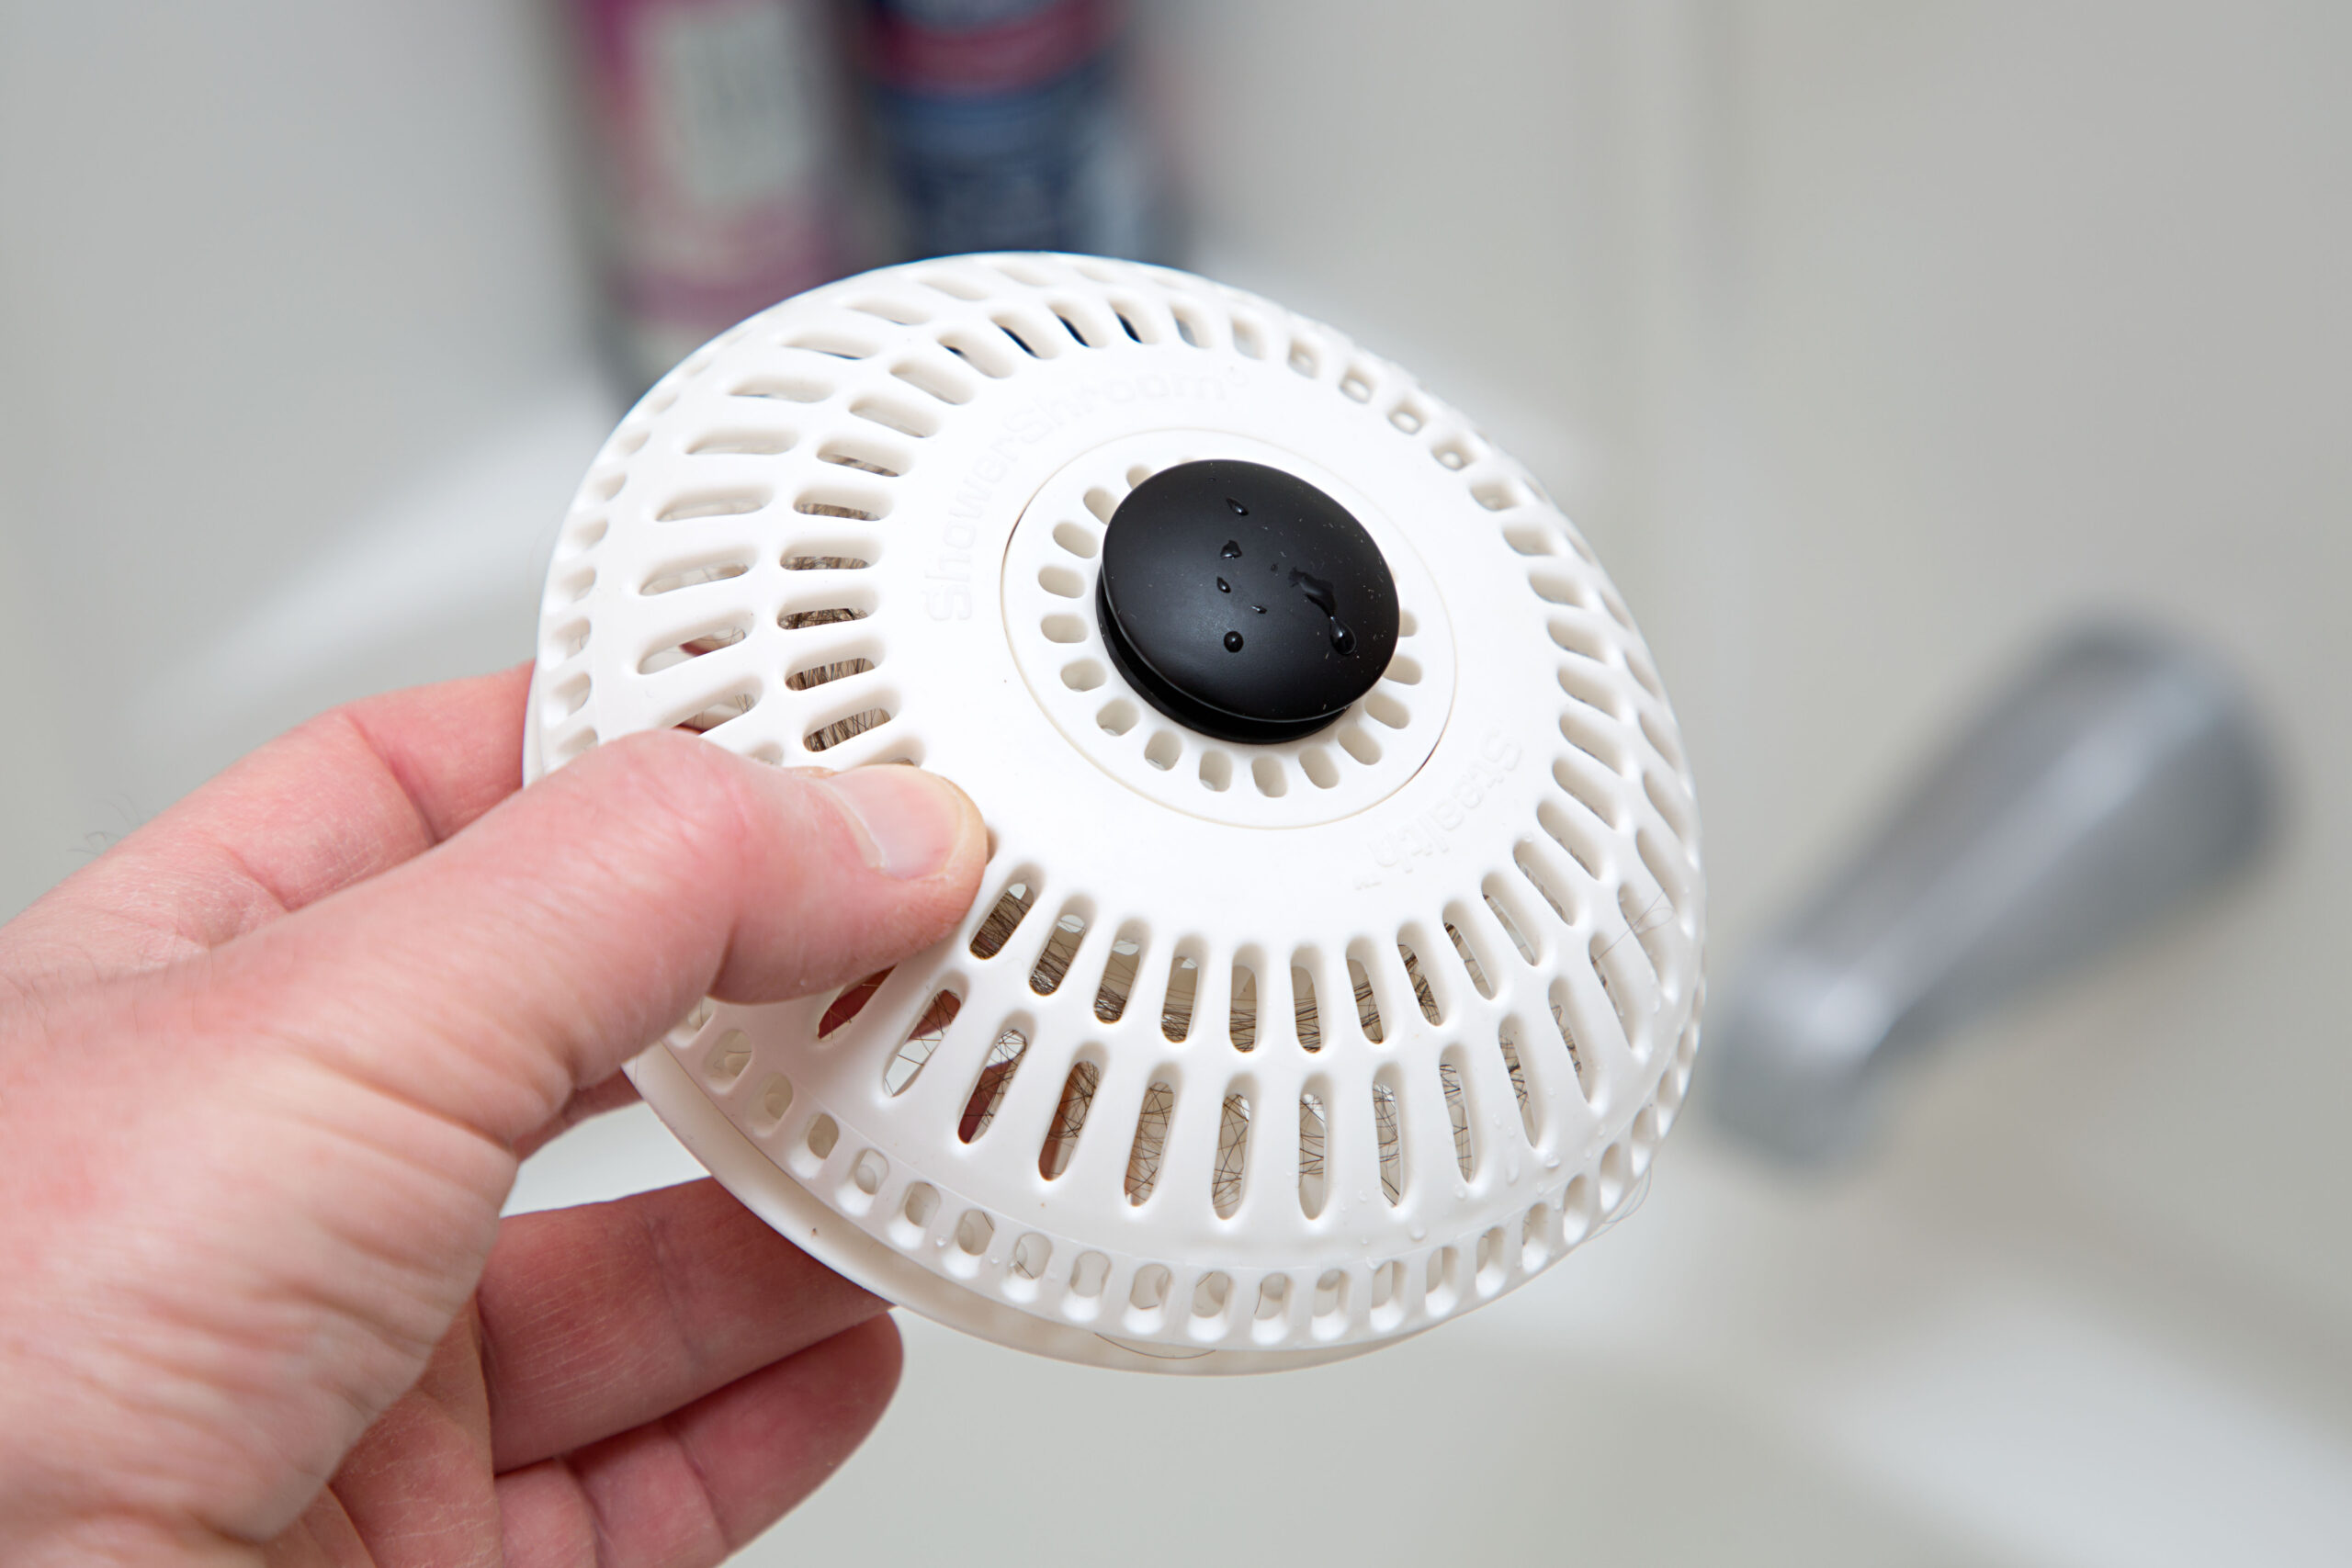 ShowerShroom Stealth Launches on Kickstarter as the Premier Universal Clog Preventer for Shower and Tub Drains 1